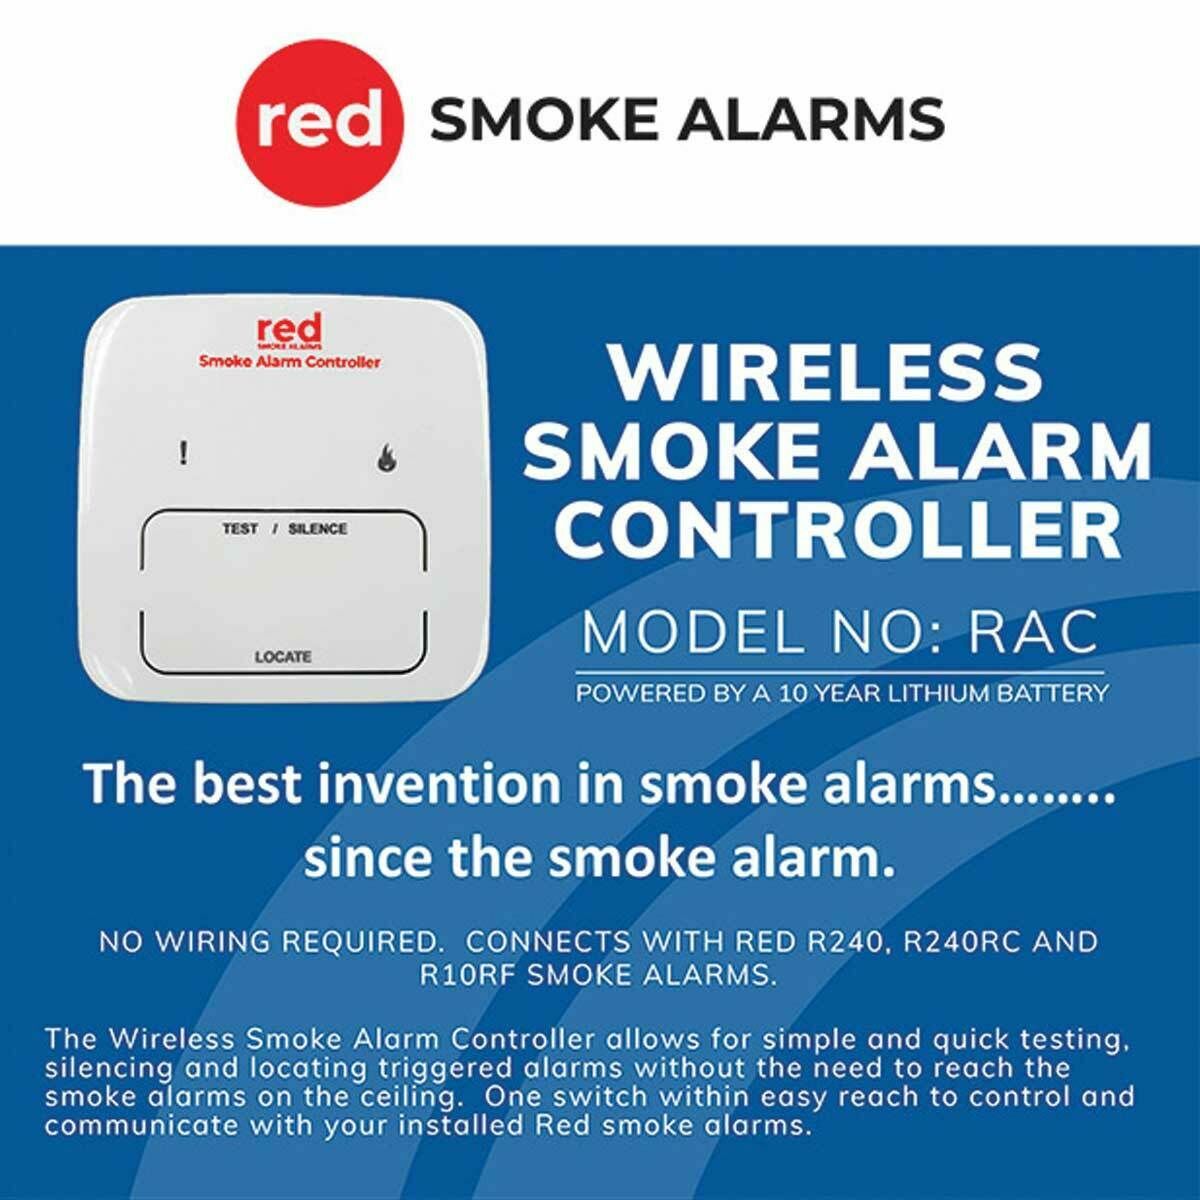 Red Smoke Alarms RF Wireless Controller RAC with 10 Year Lithium Battery